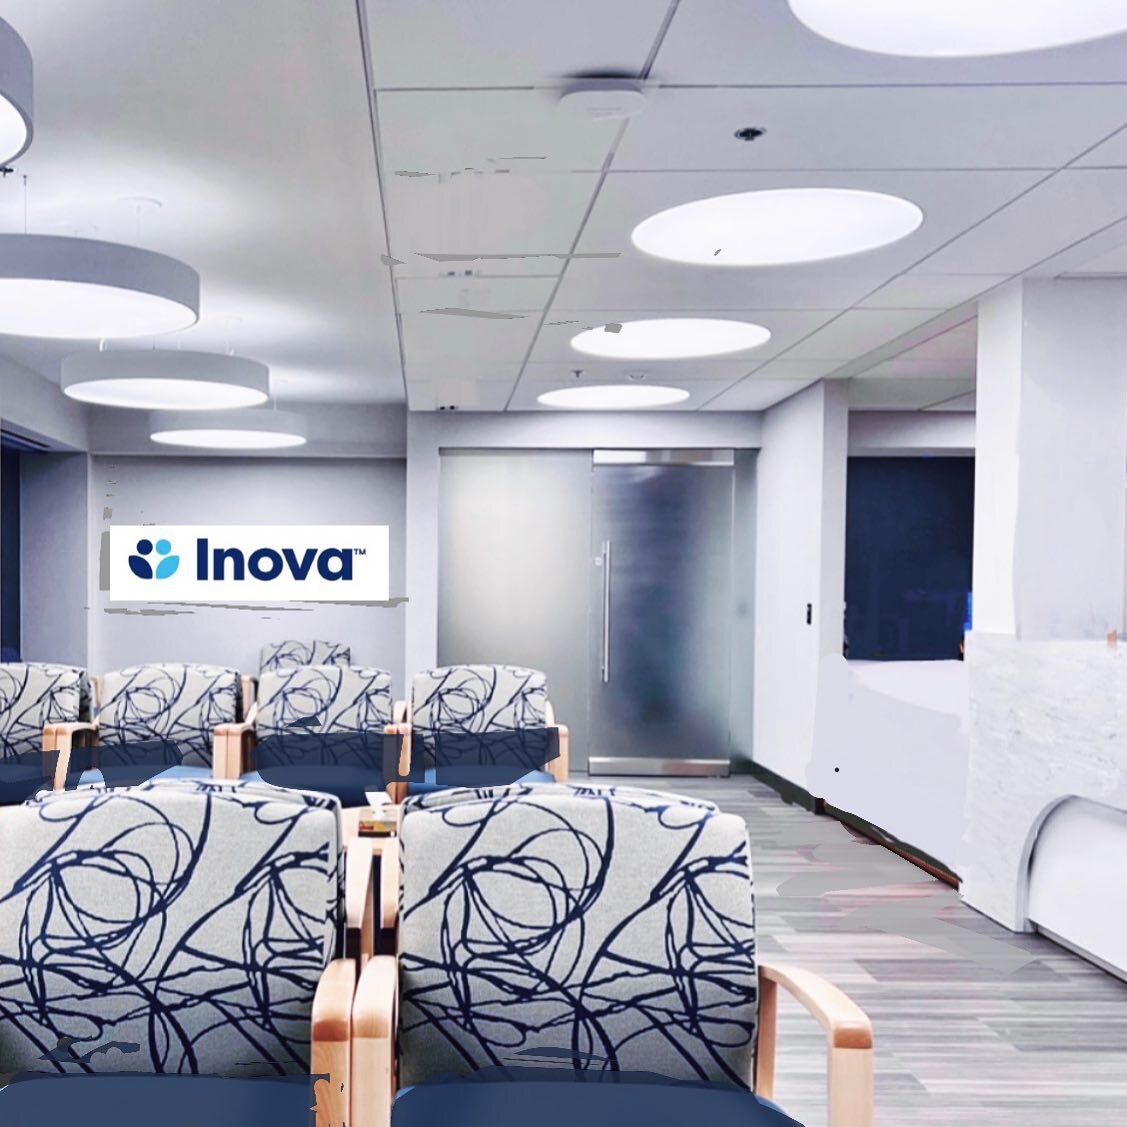 First installation, and officially, new logo and corporate colors for Inova Health System